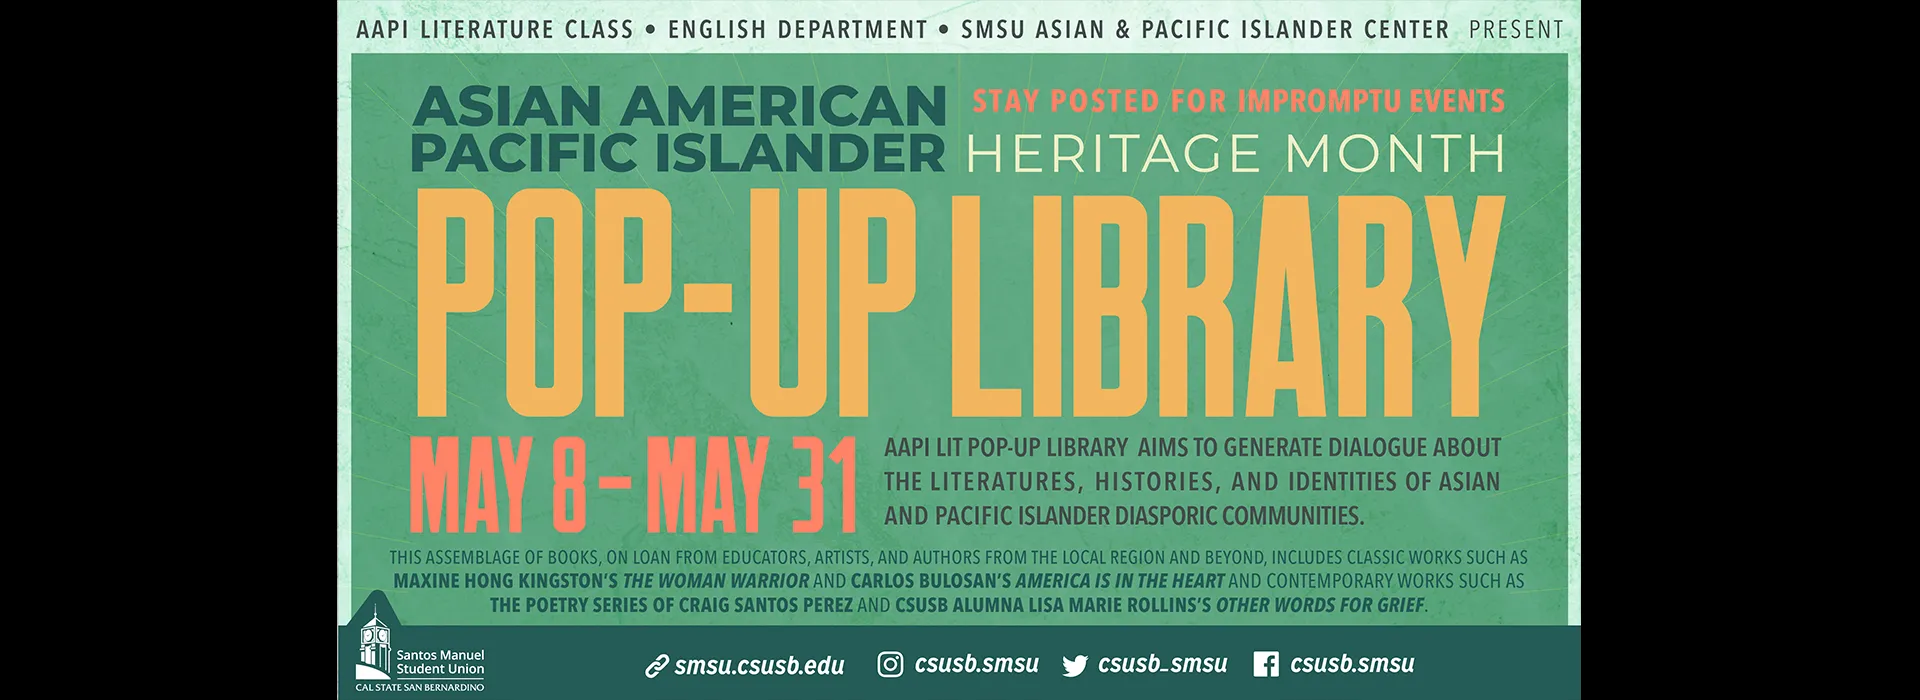 Pop-up library at Asian & Pacific Islander Center in SMSU